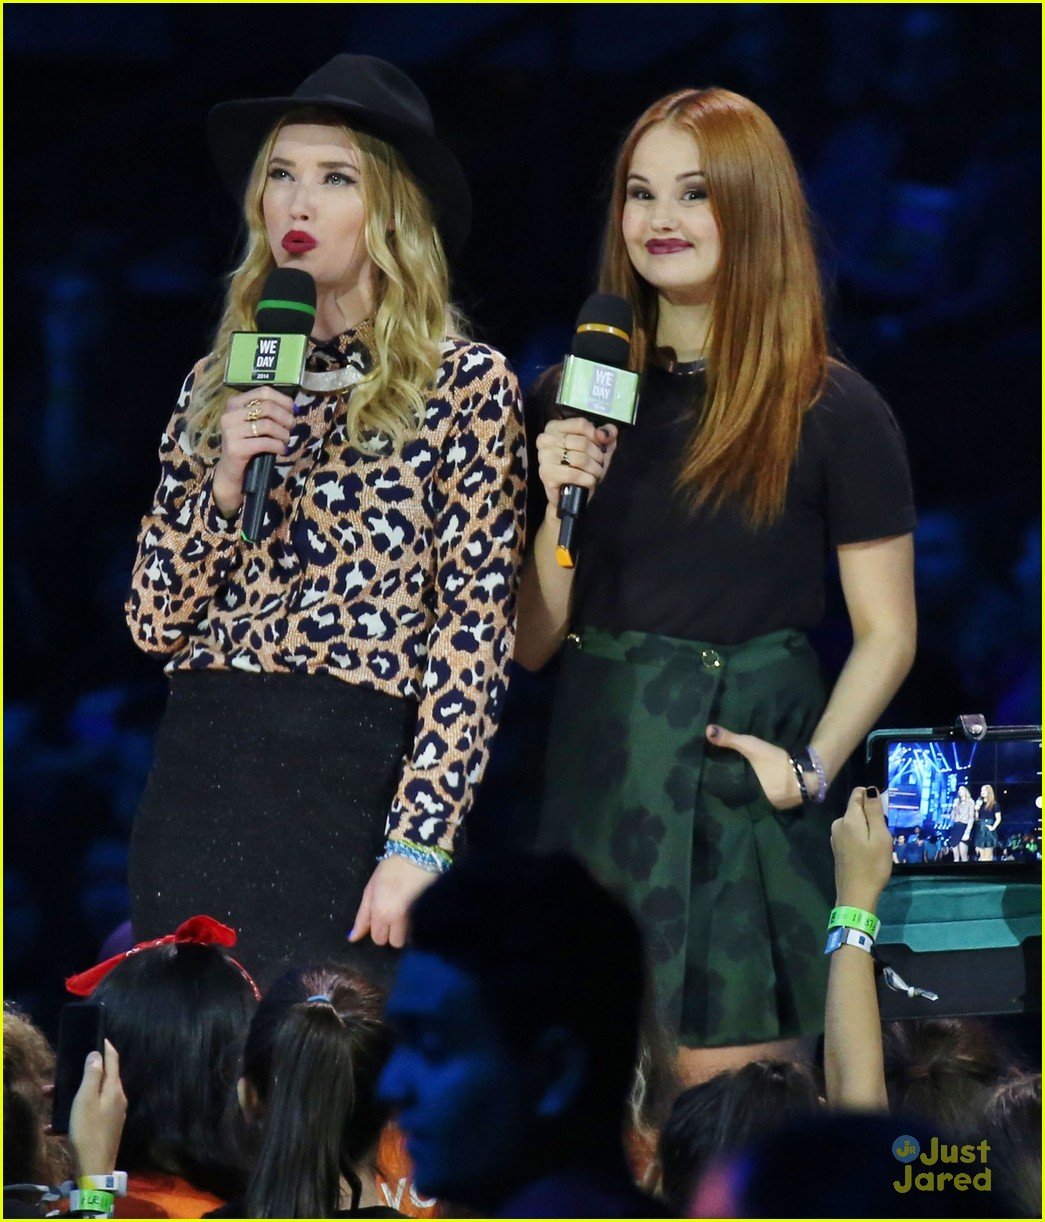 debby ryan shawn mendes we day vancouver 03